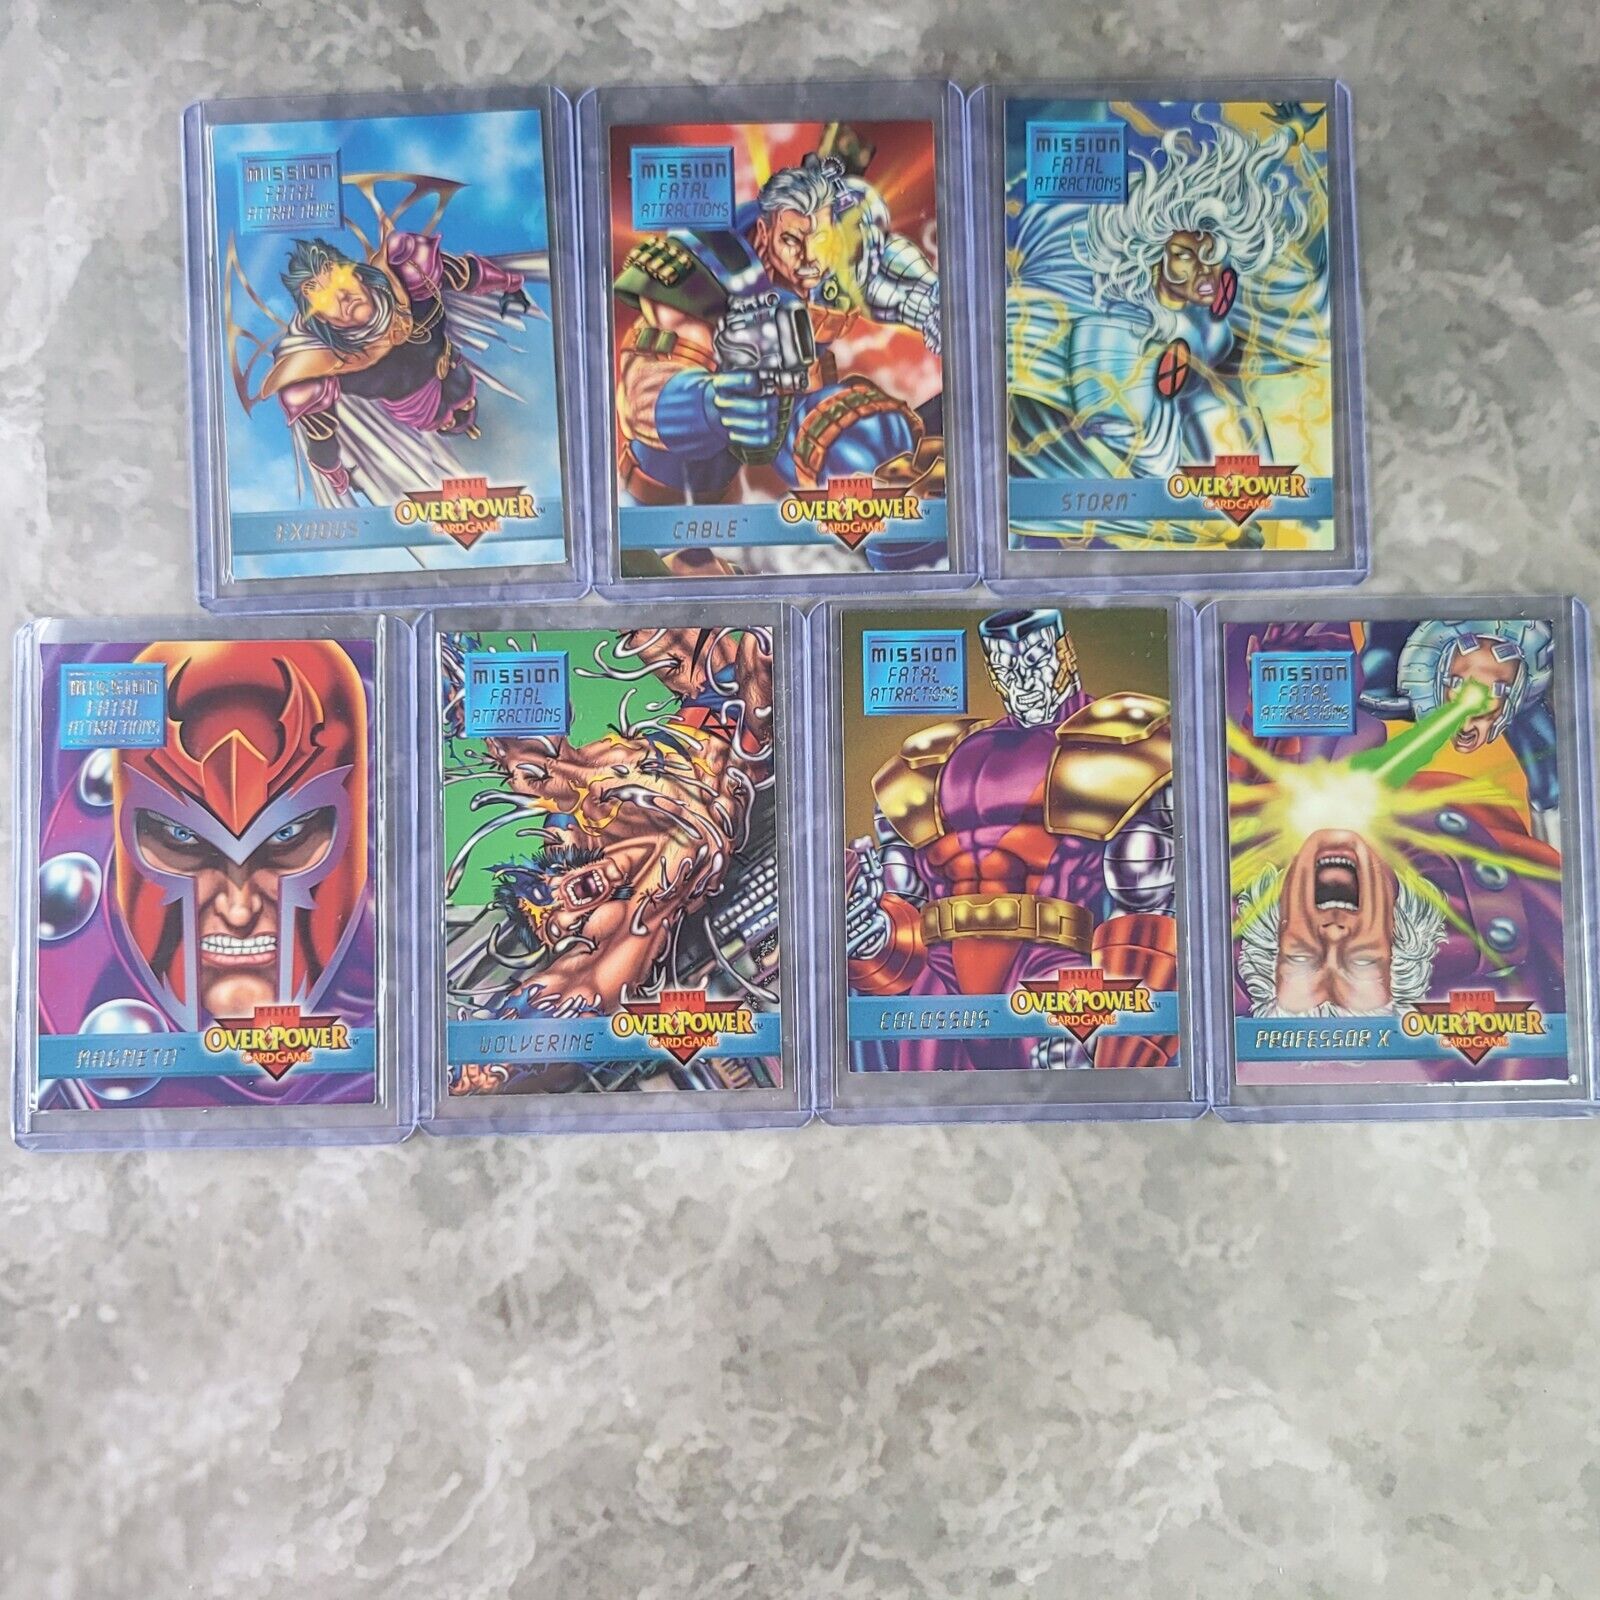 1995 Marvel Overpower Card Game Mission Fatal Attractions Cards Complete Set 1-7